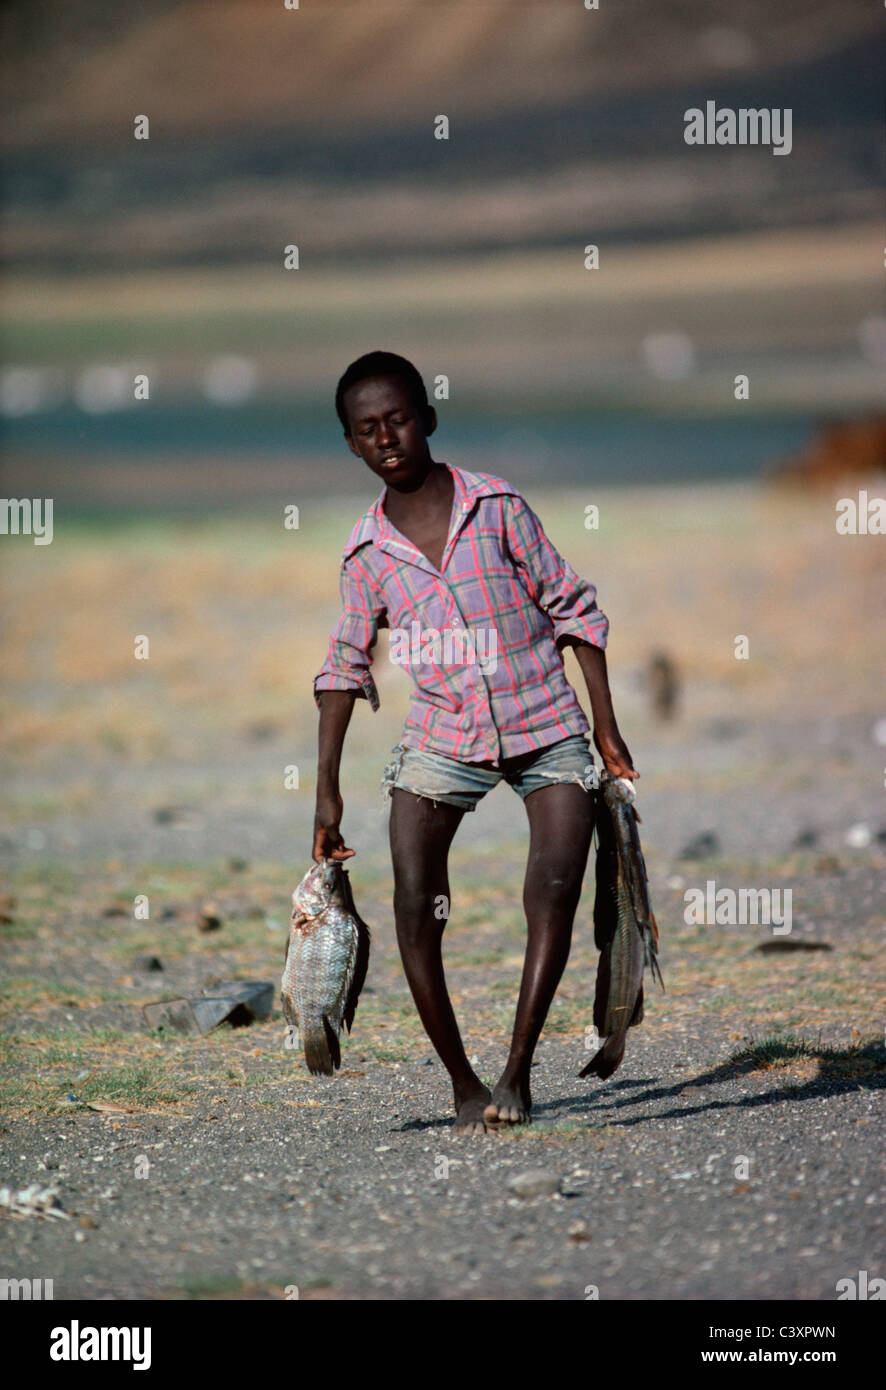 El Molo child suffering from Rickets. Stock Photo